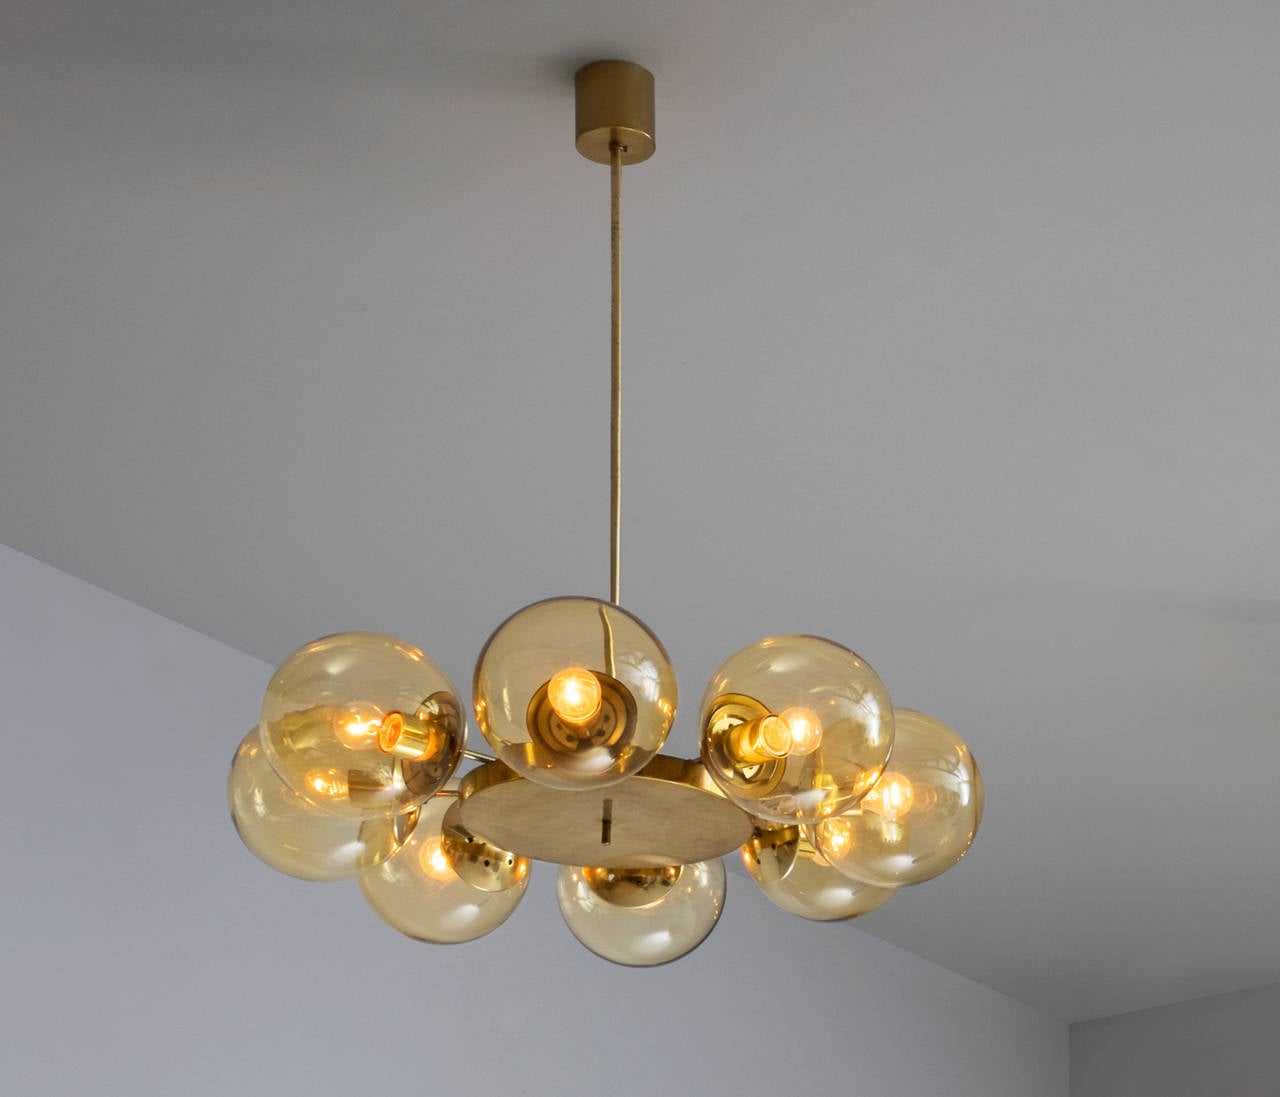 Large chandeliers with eight glass bulbs in brass.

The brass is nicely patinated and reflexes the light which creates a nice soft diffuse lighting, due to the gold yellow tinted bulbs. A warm ambient light for the surrounding space. Five items in